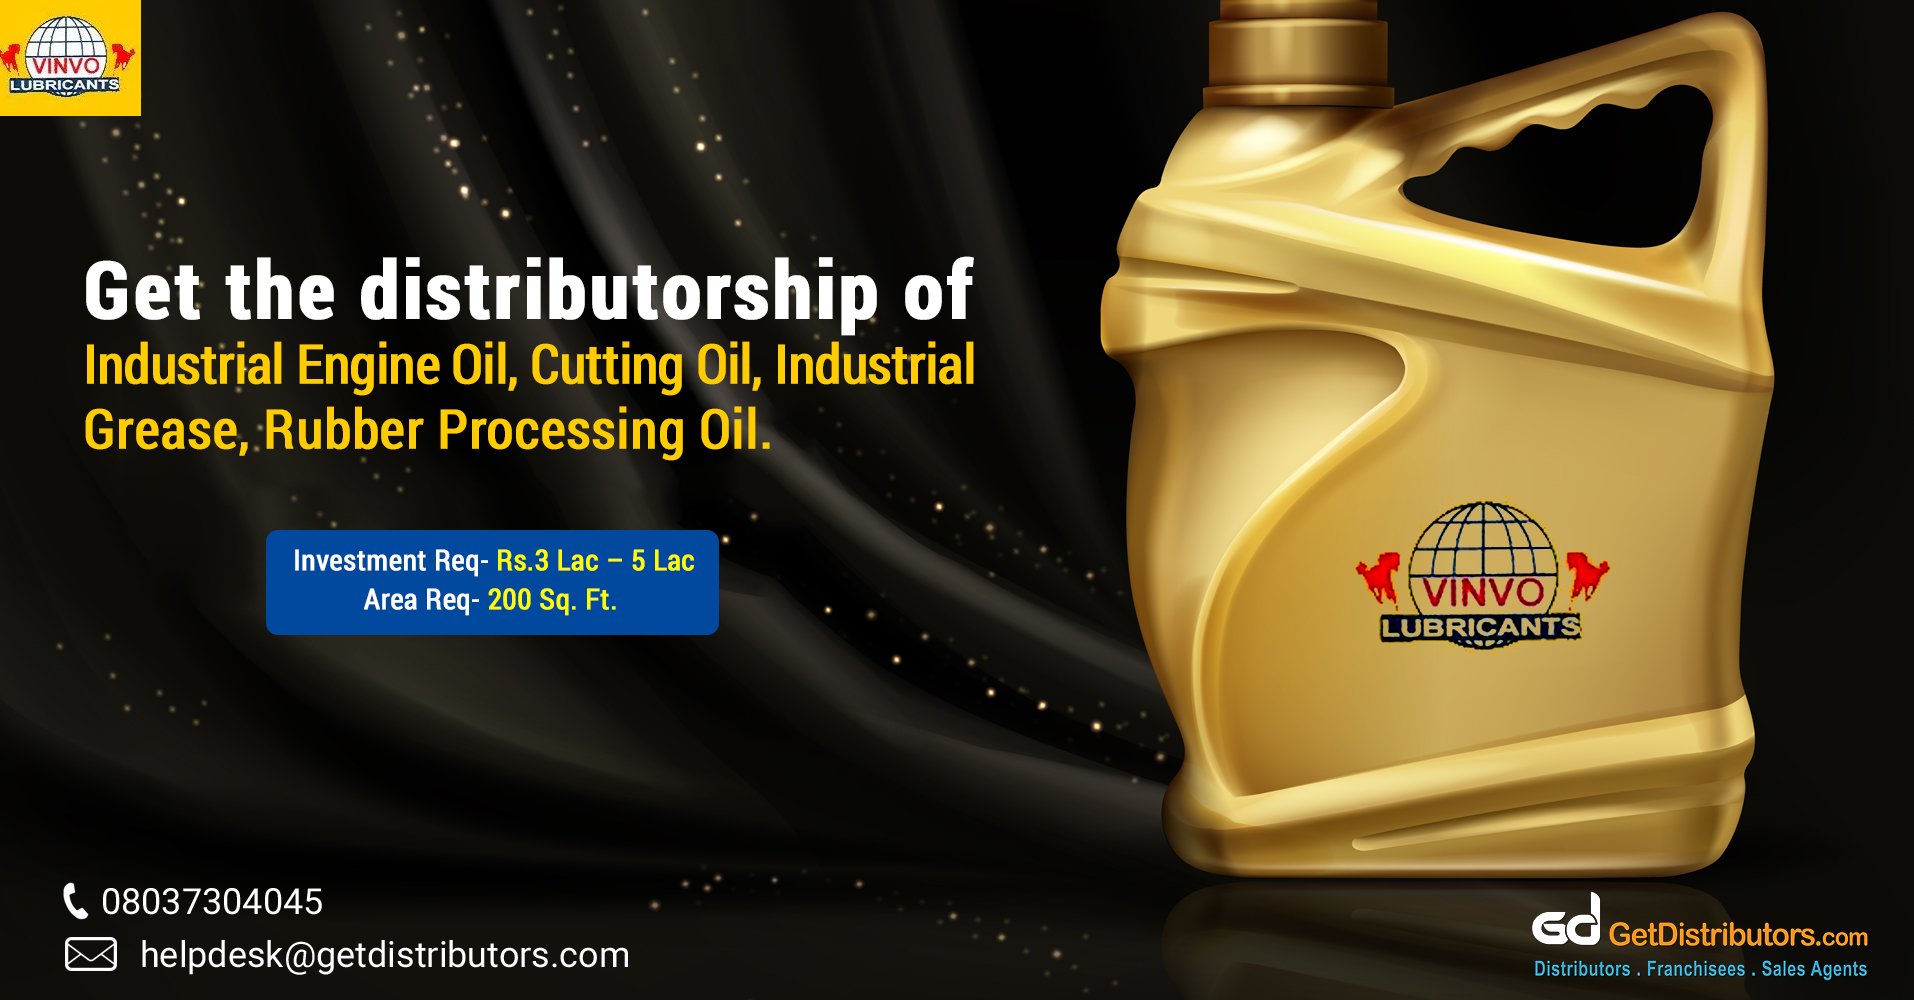 Presenting an extensive array of industrial oil and similar products for distribution